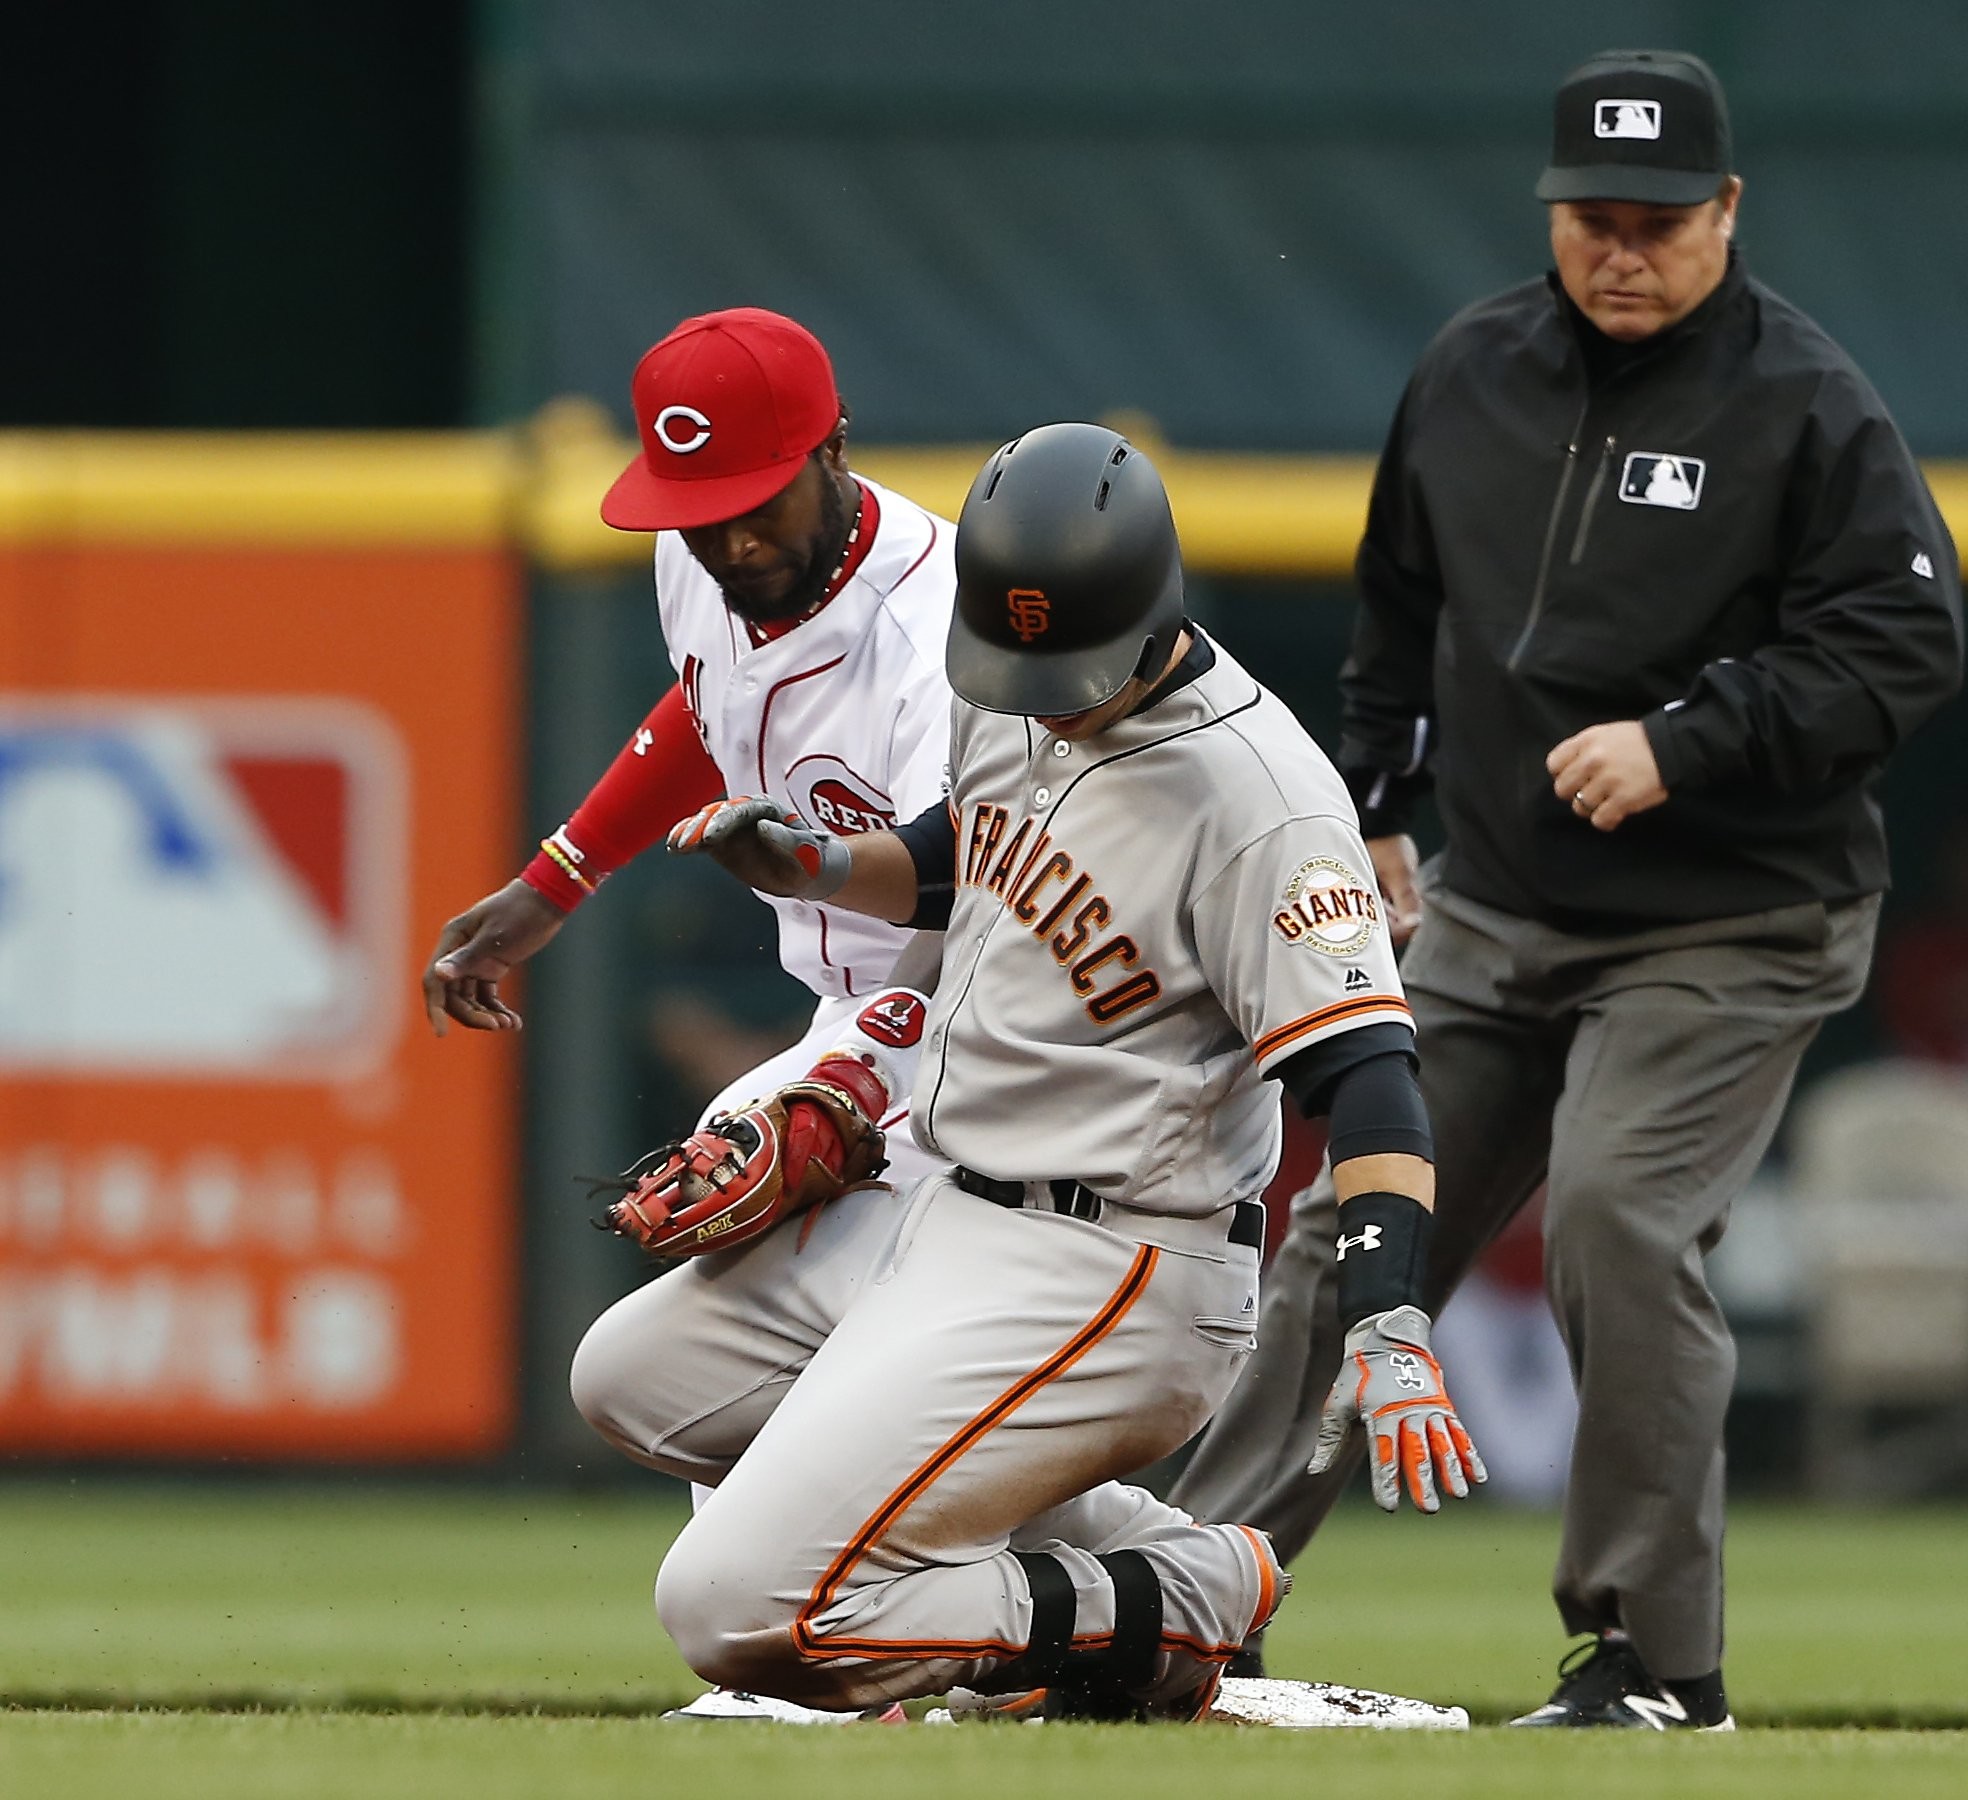 Giants Posey discusses hitting struggles, plus Wednesdays lineup sans a Belt – SFGate